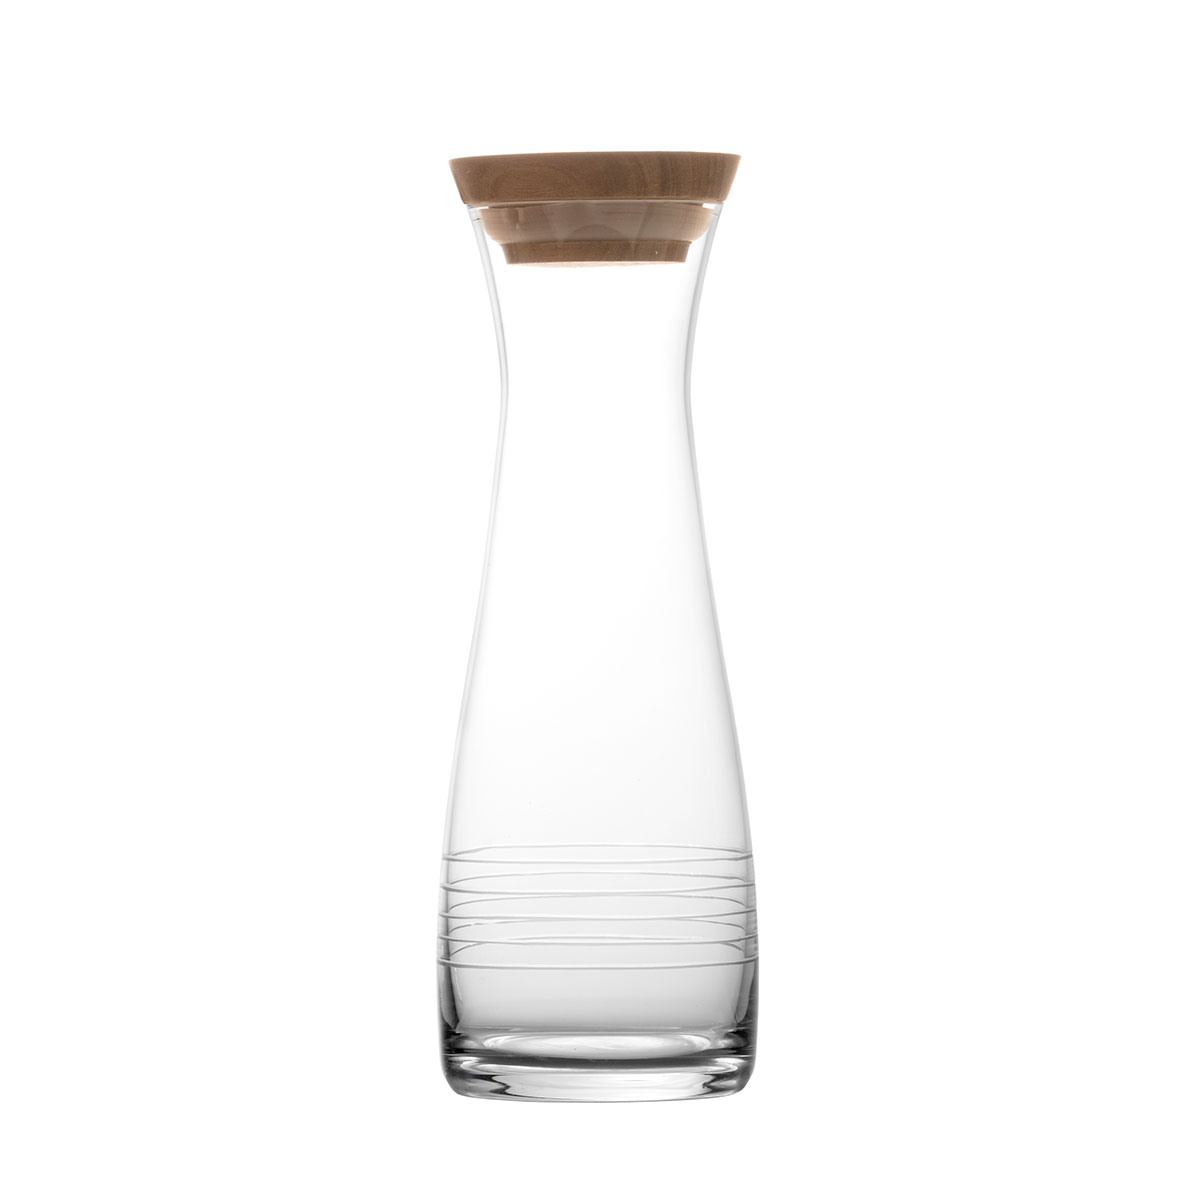 Fortessa Crafthouse Classic Carafe with Acacia Top